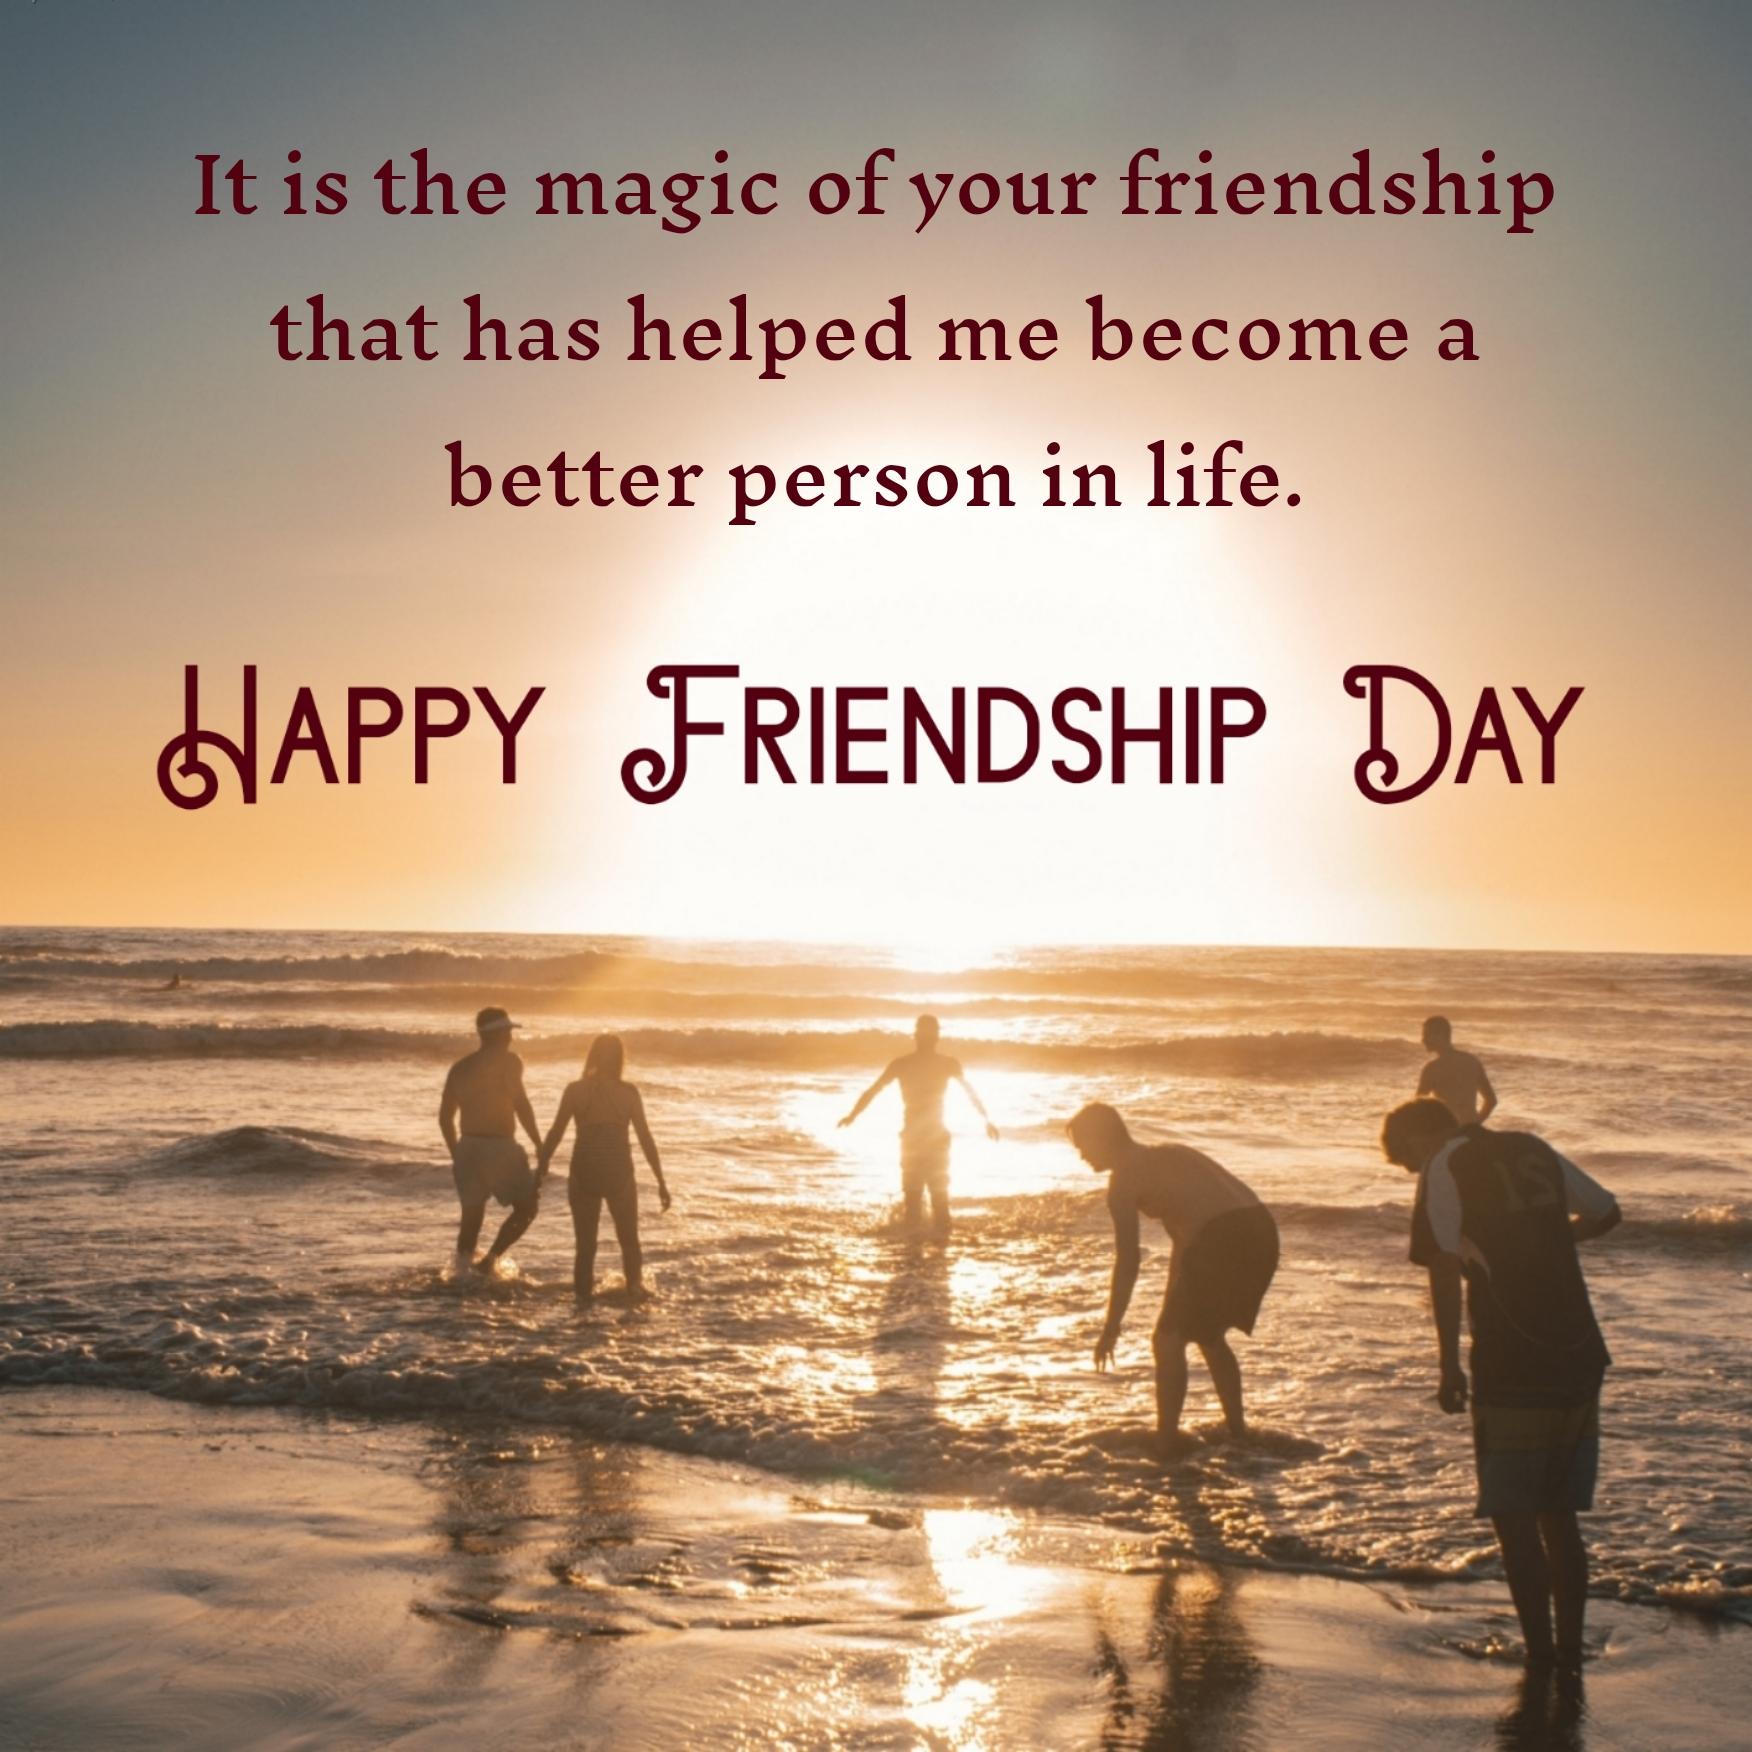 It is the magic of your friendship that has helped me